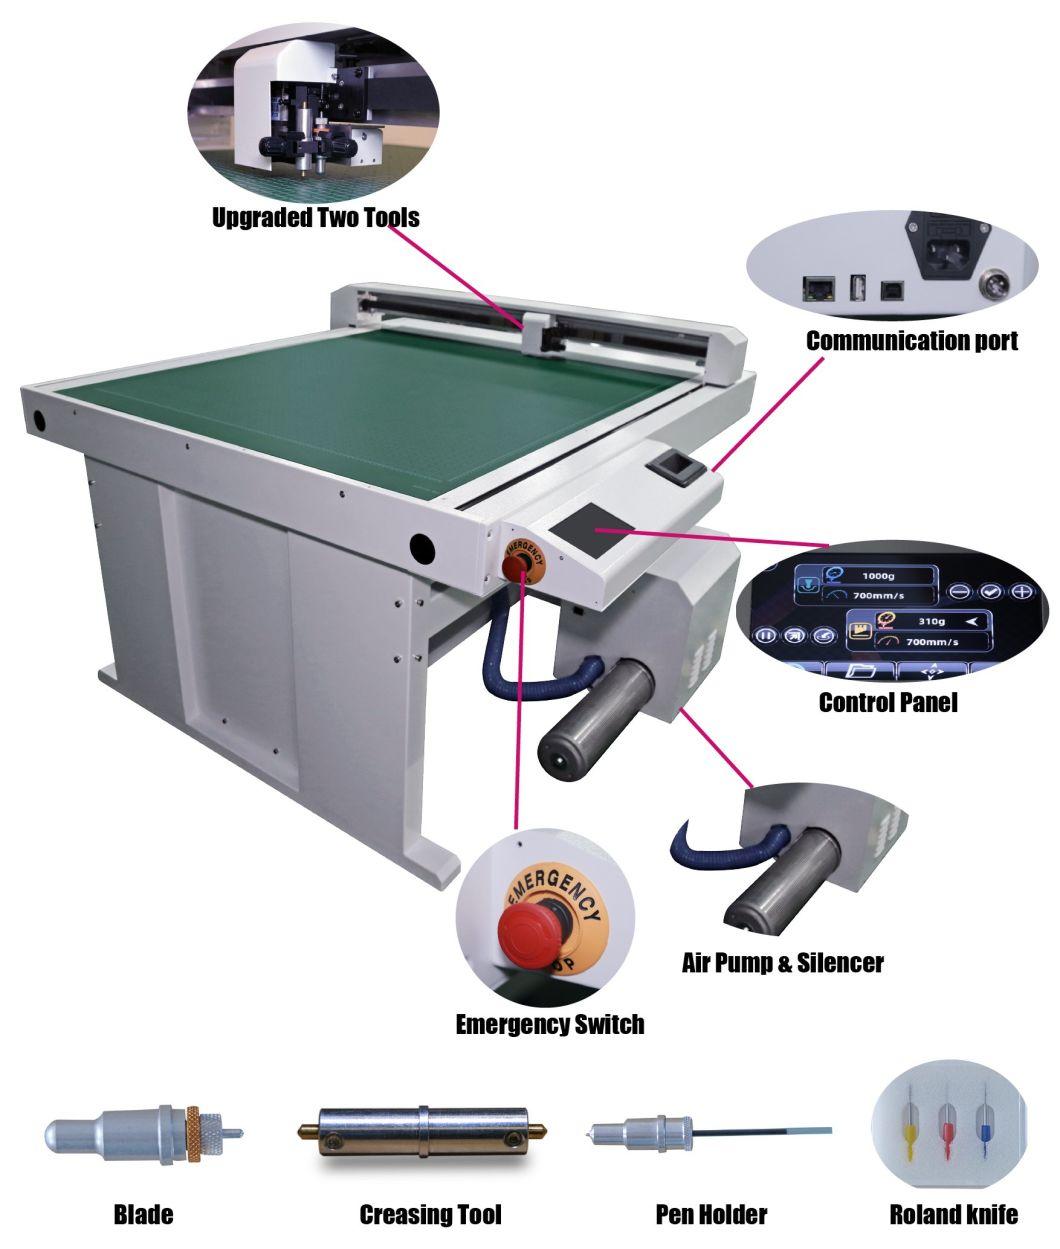 Digital Camera Intelligent Control Panel Double Tool Holds Contour Cutting and Creasing Flatbed Cutter